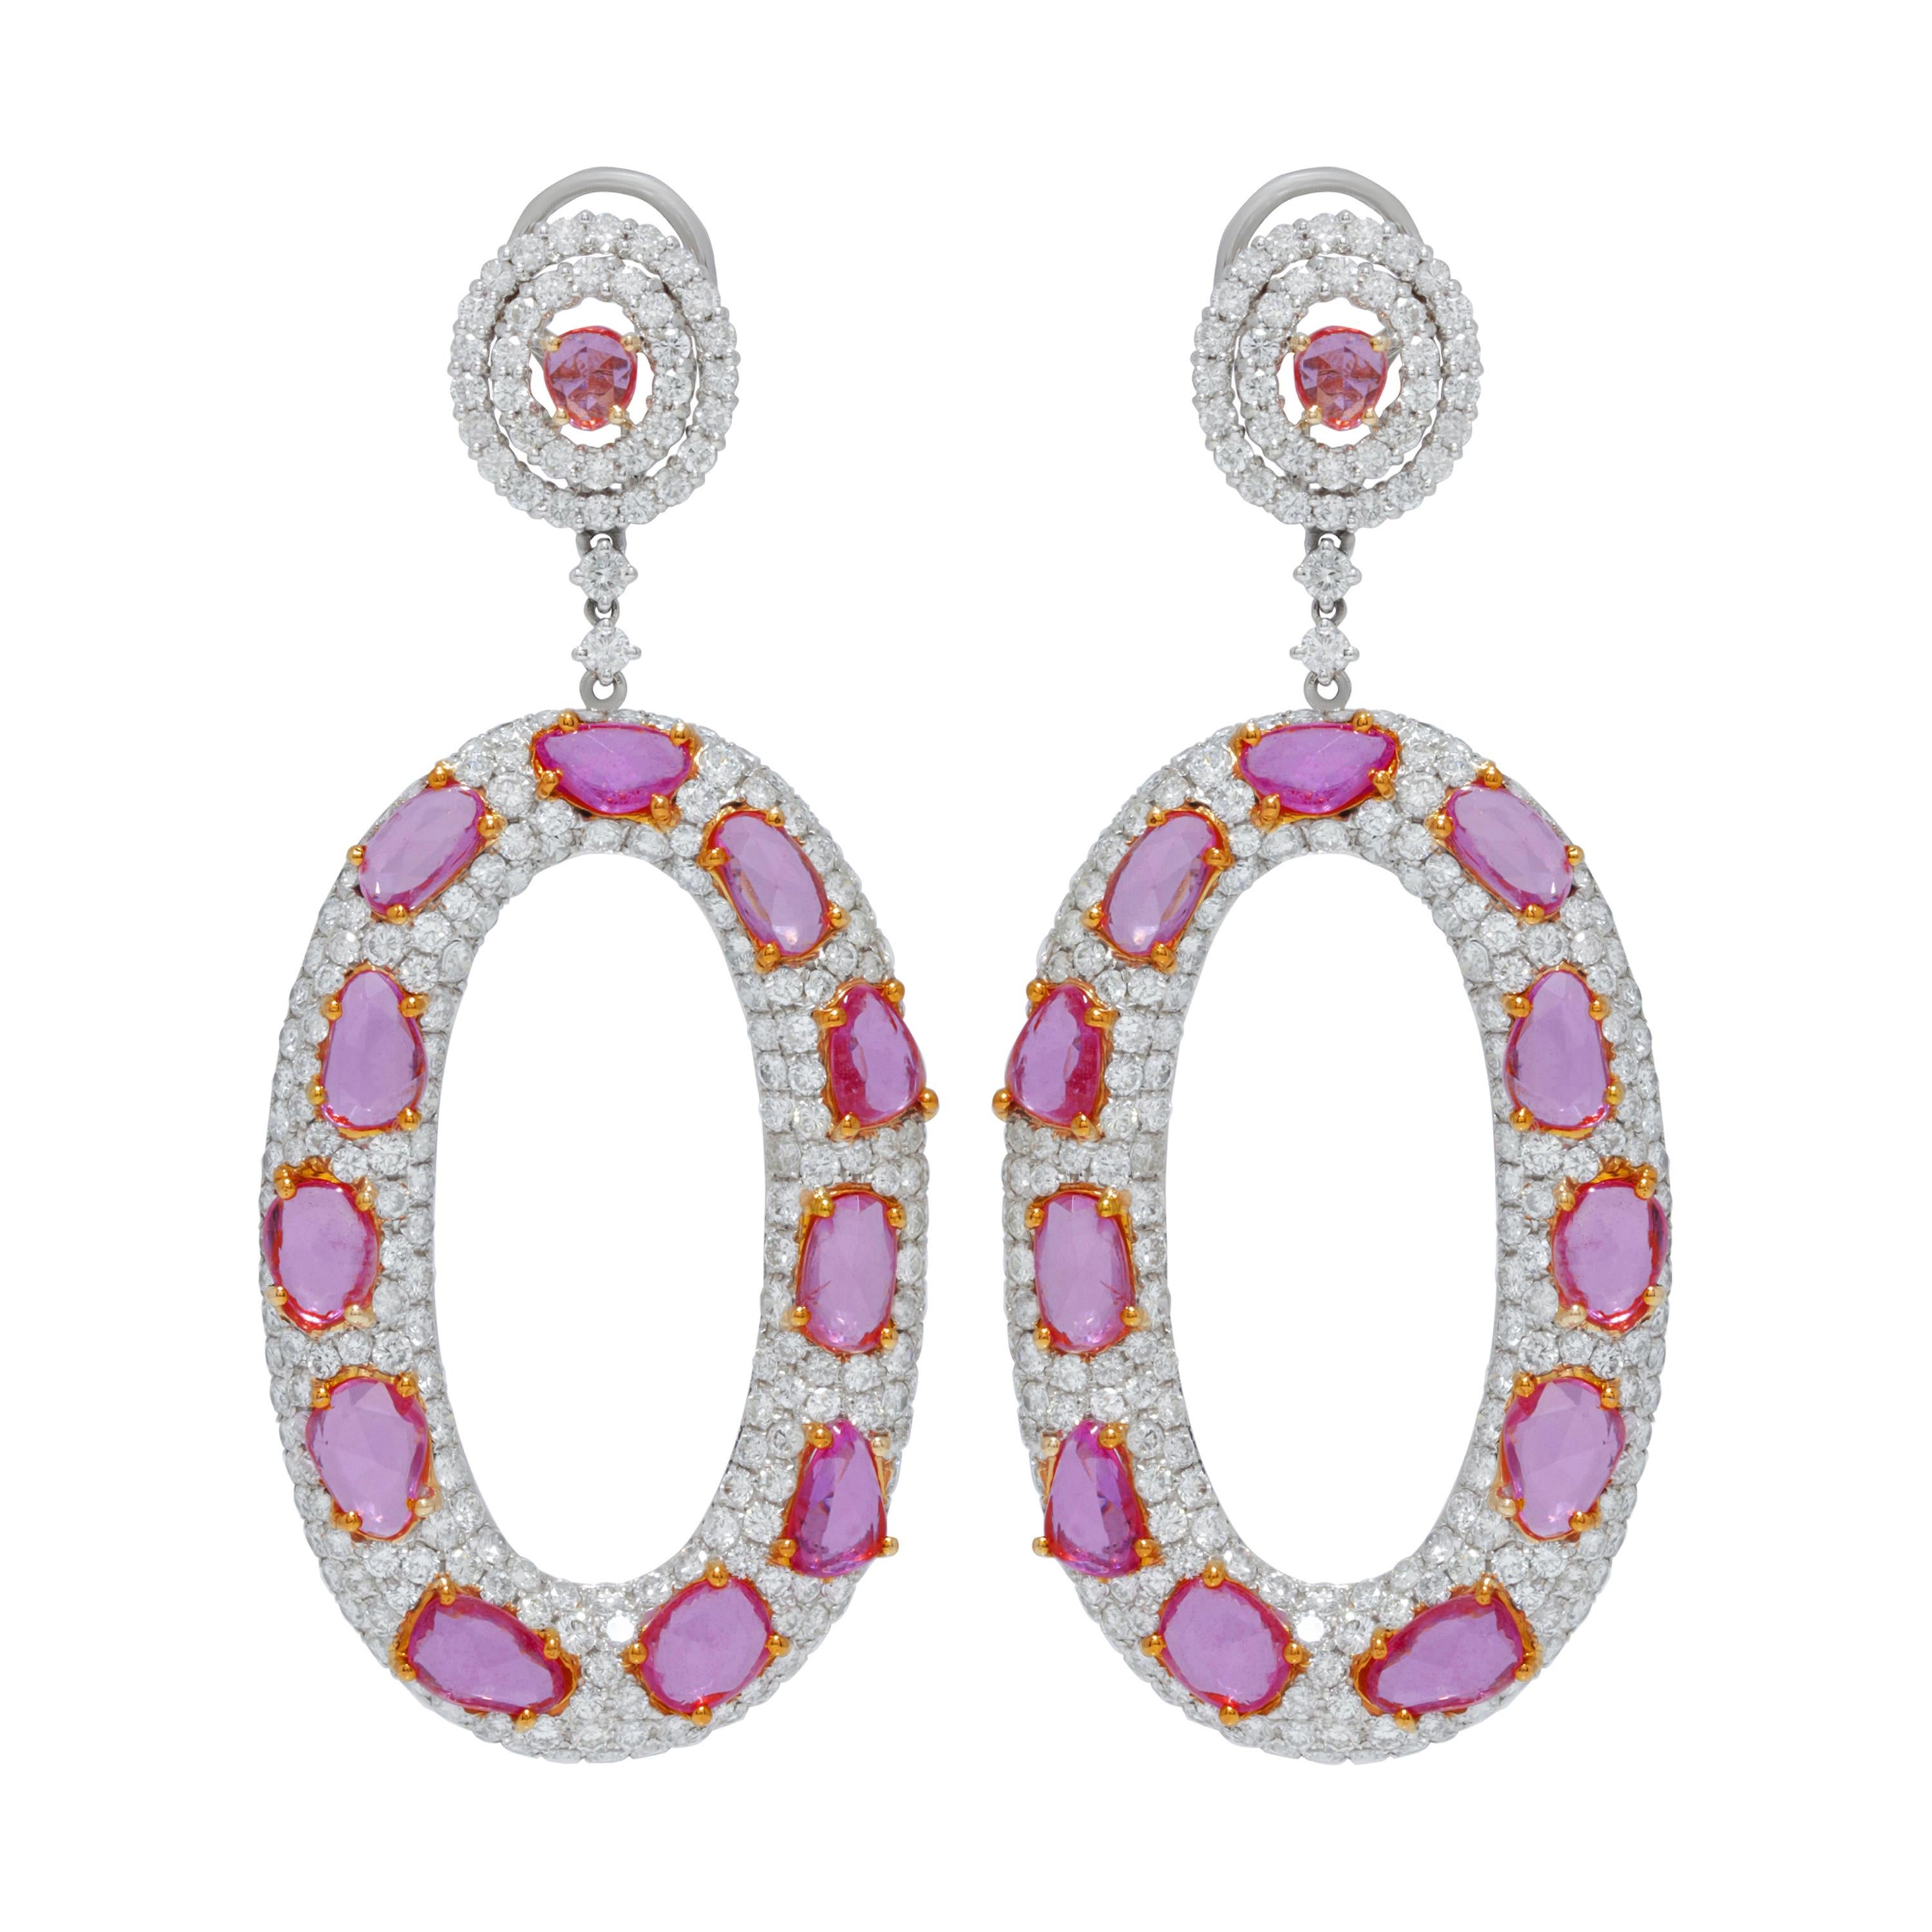 18k White Gold Earrings with 12.62cts Pink Sapphire and 10.85cts Diamond